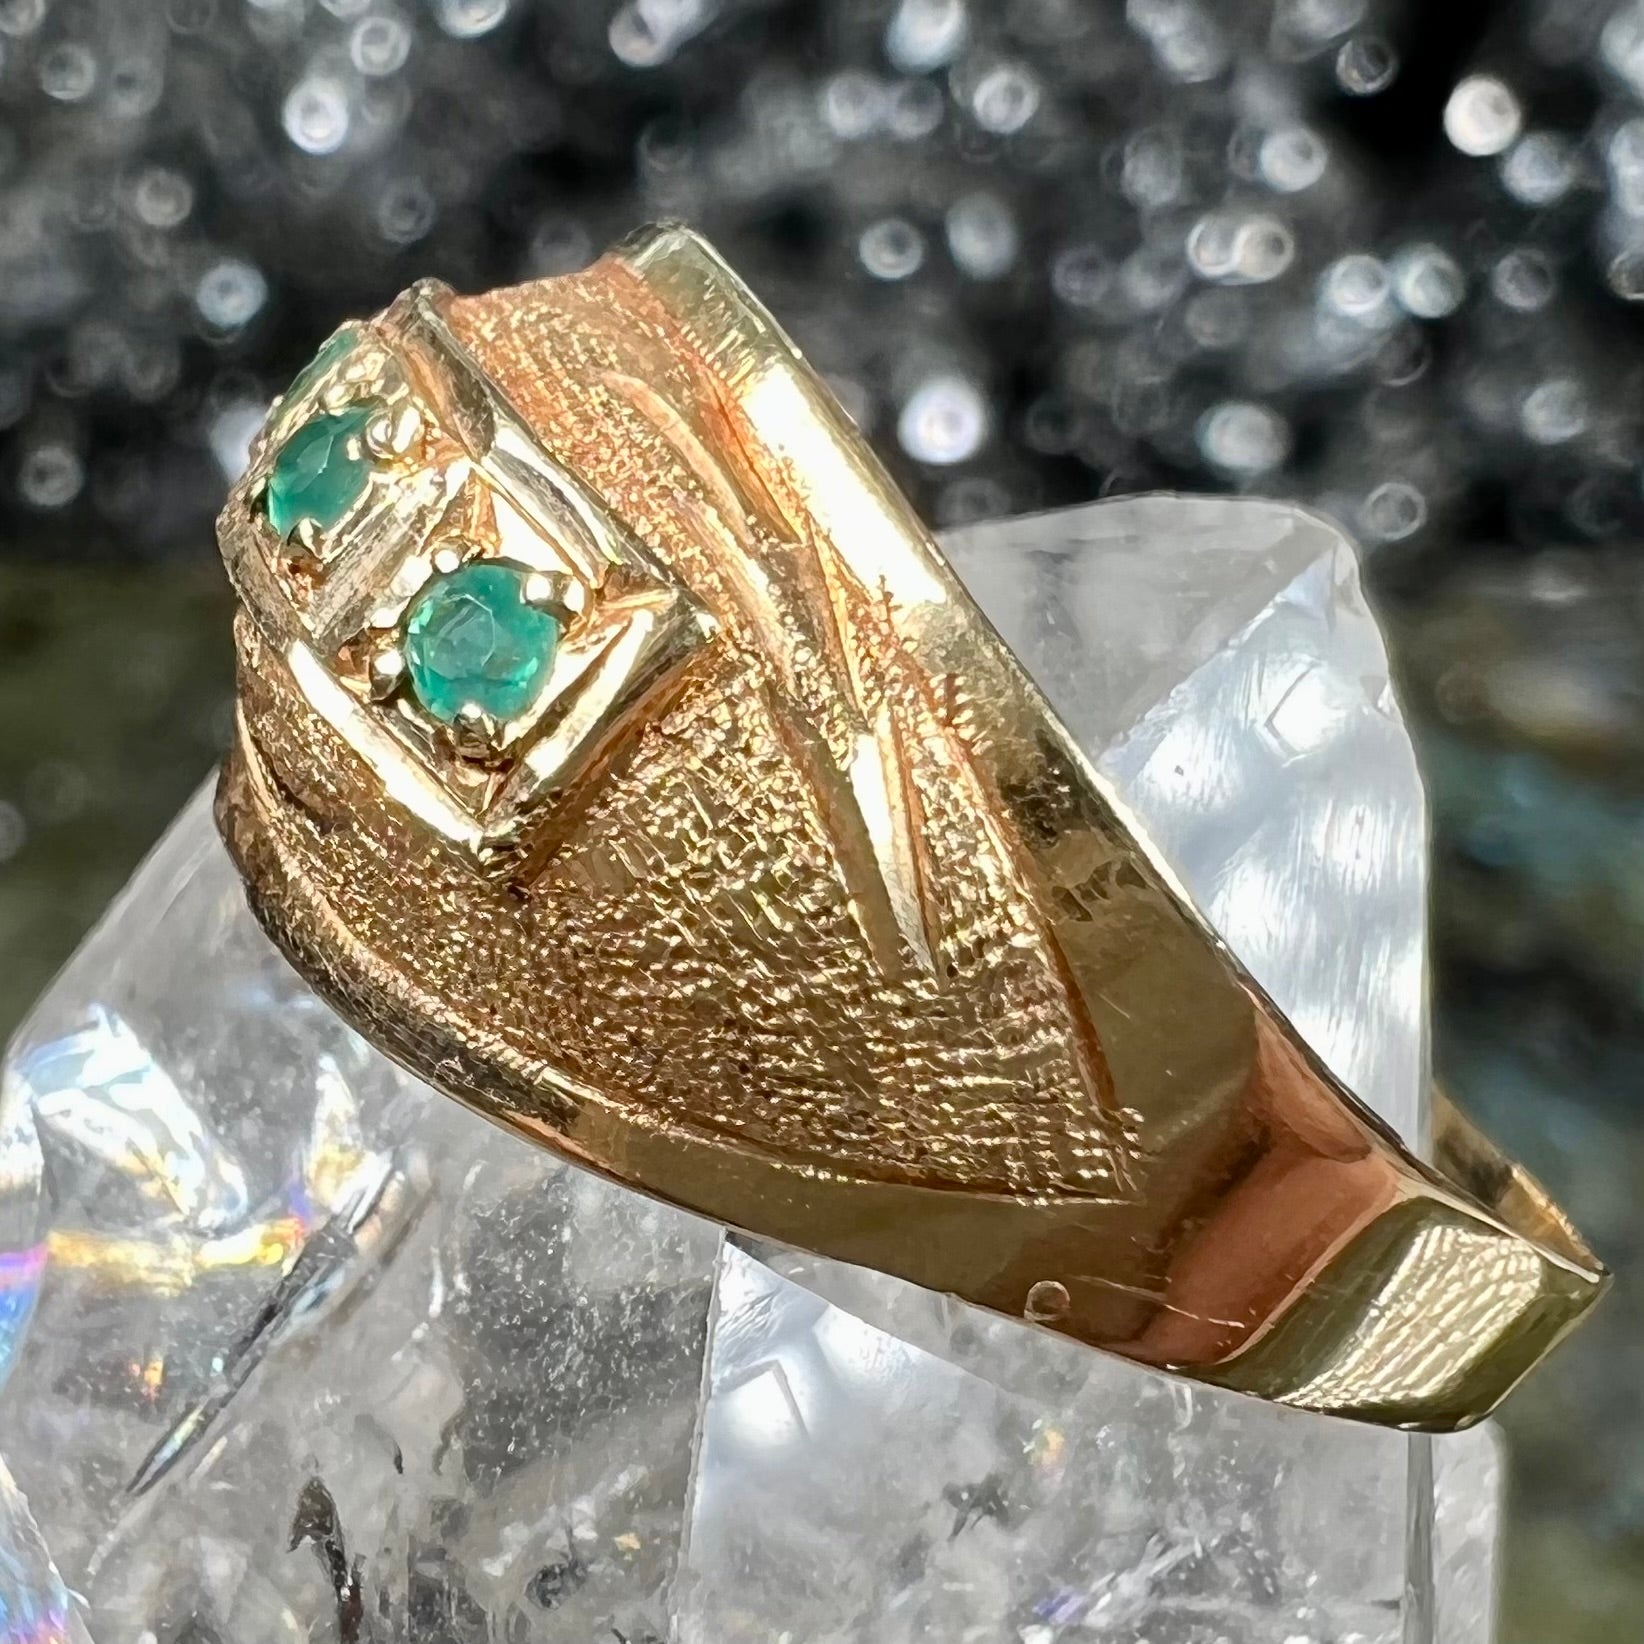 A 1920's style yellow gold three stone round cut emerald ring.